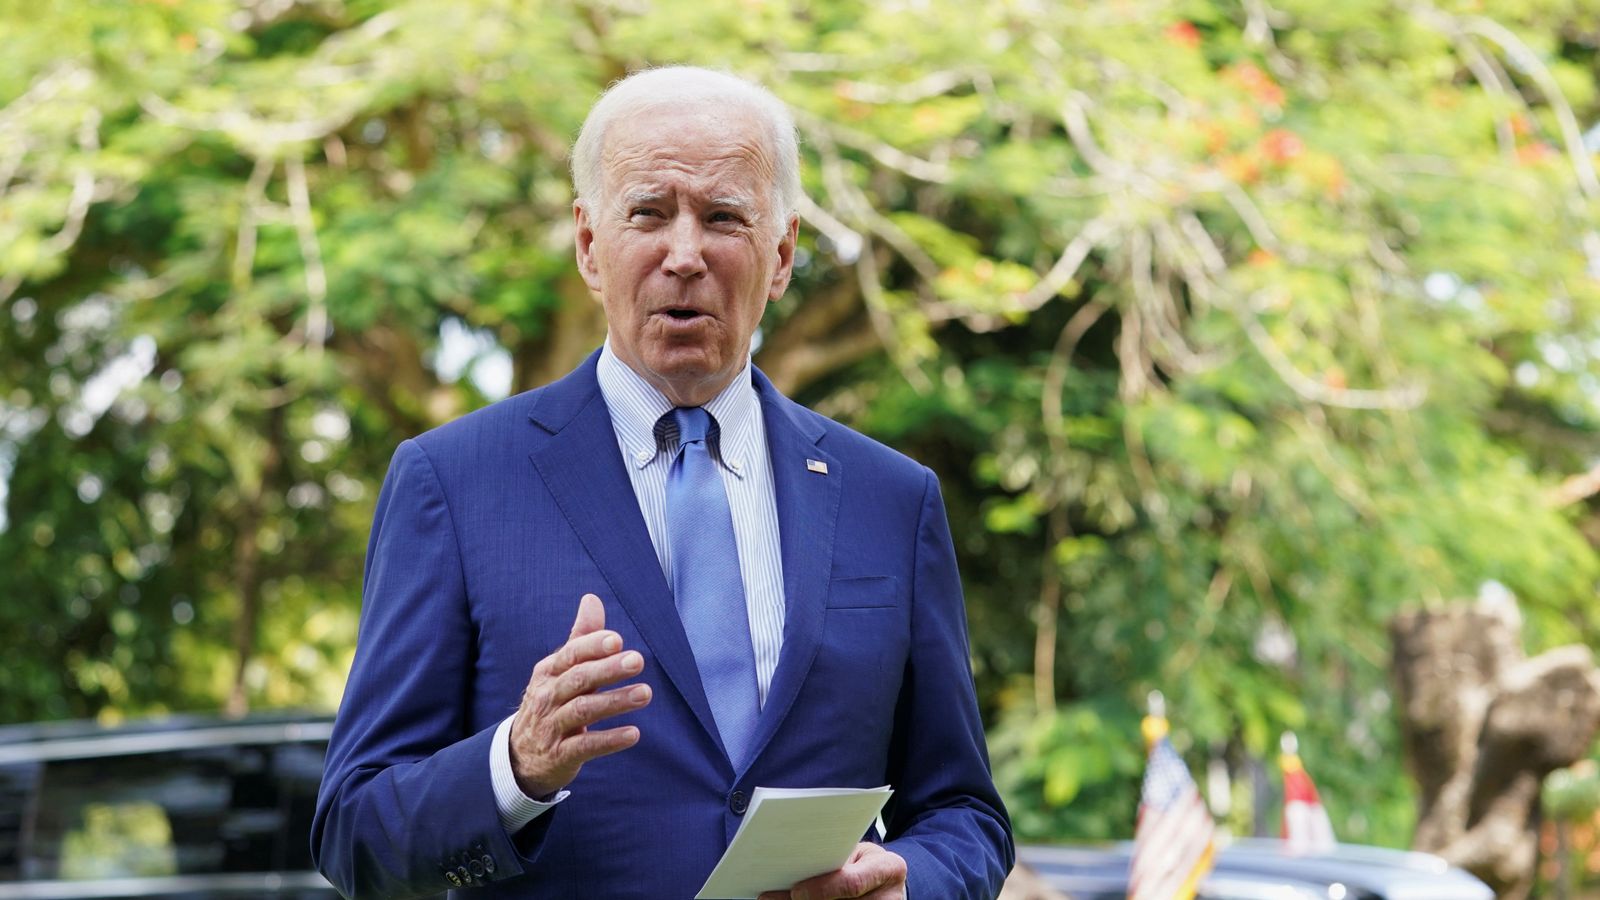 Missile that hit Poland killing two is unlikely to have been fired from Russia, Biden says